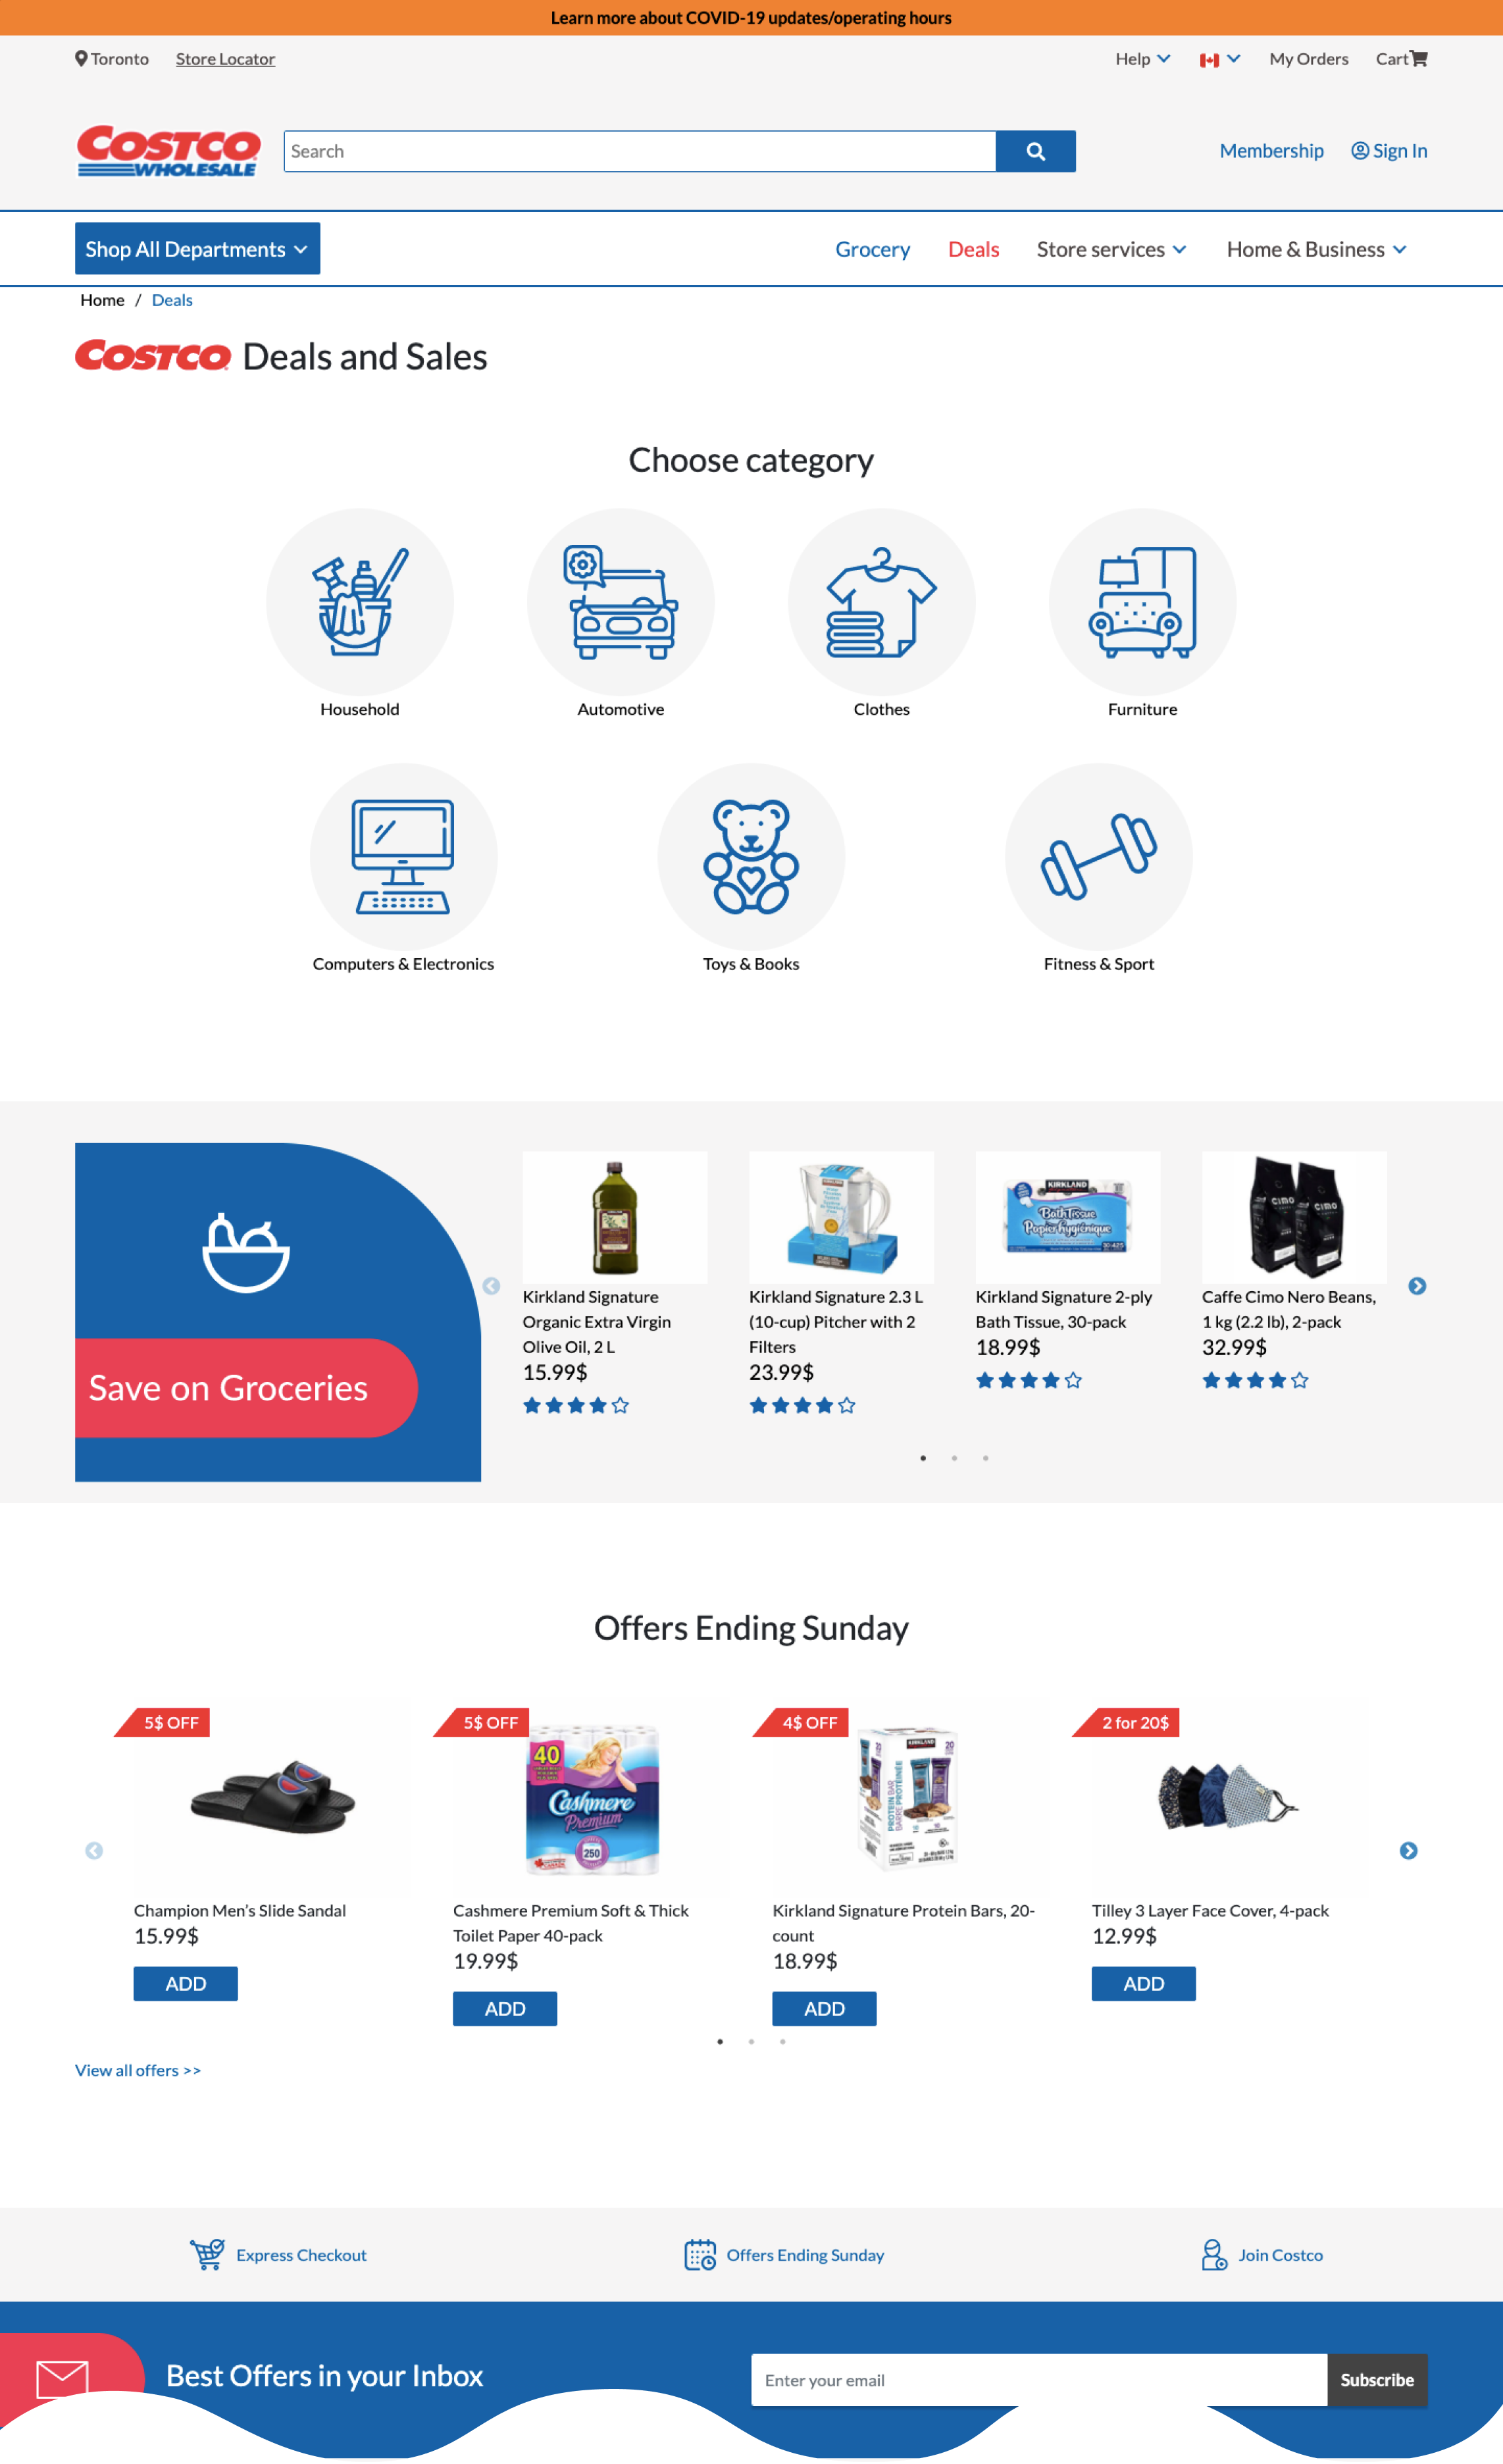 Deals and Sales page image